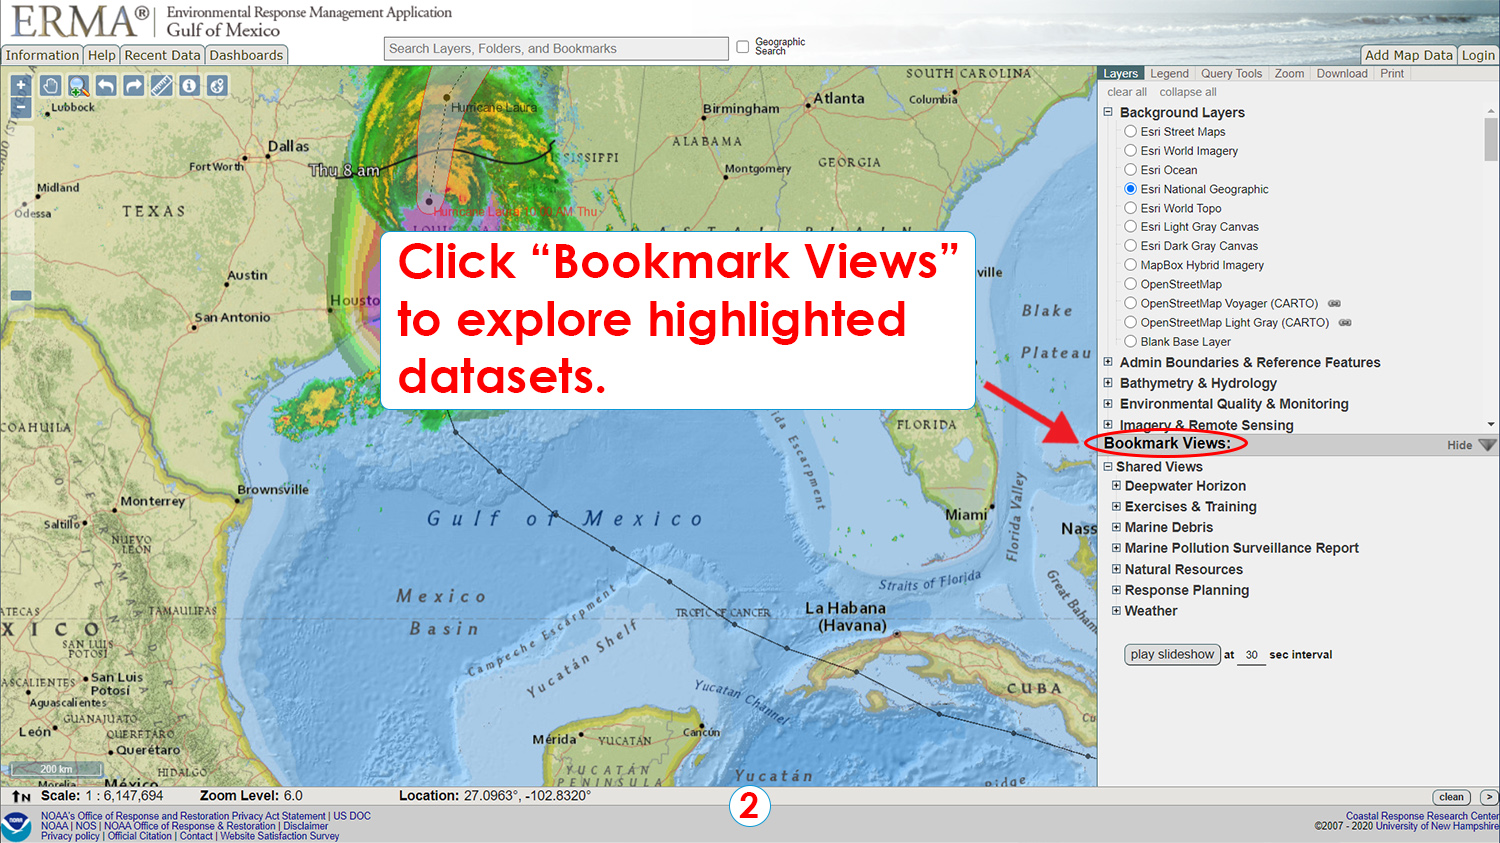 Step 2: Click "Bookmark Views" to explore highlighted datasets.